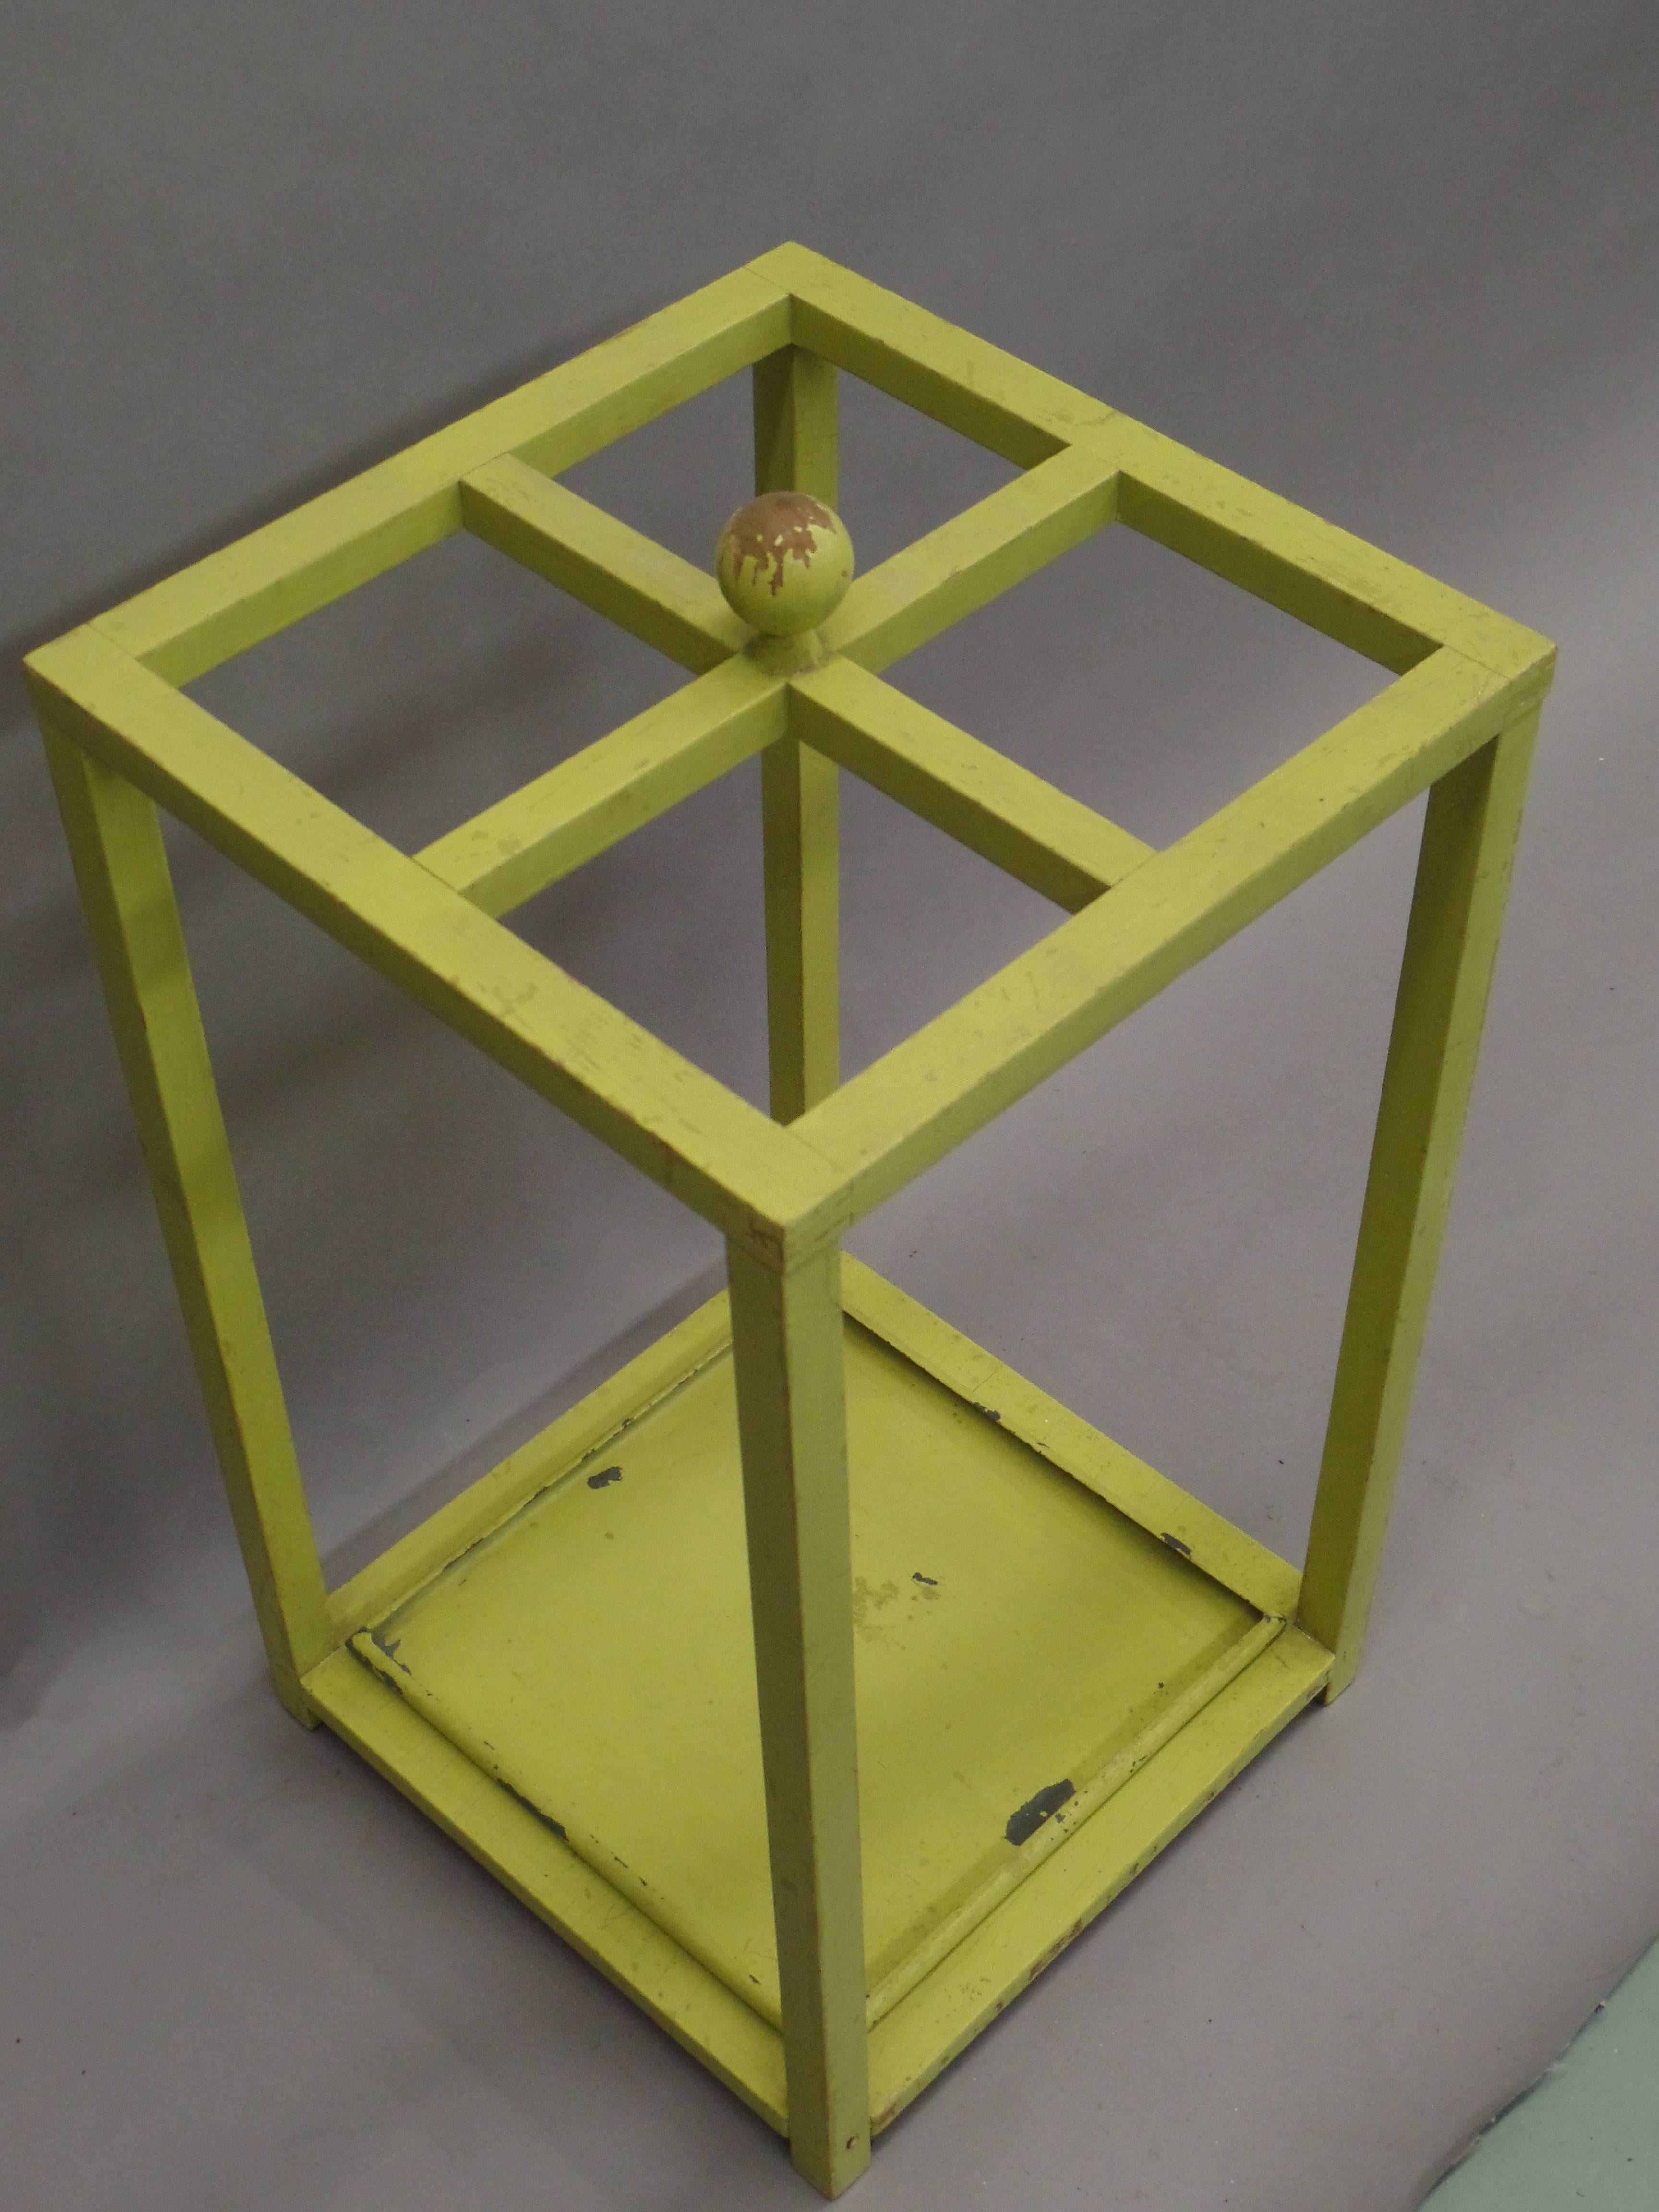 Early German modern handmade wood umbrella holder with clean, pure minimalist lines and a symmetrical grid patterned top, one can see how works like this influenced later artists such as Sol Lewit. 

Enameled in a Shade of Lime Green possibly by a